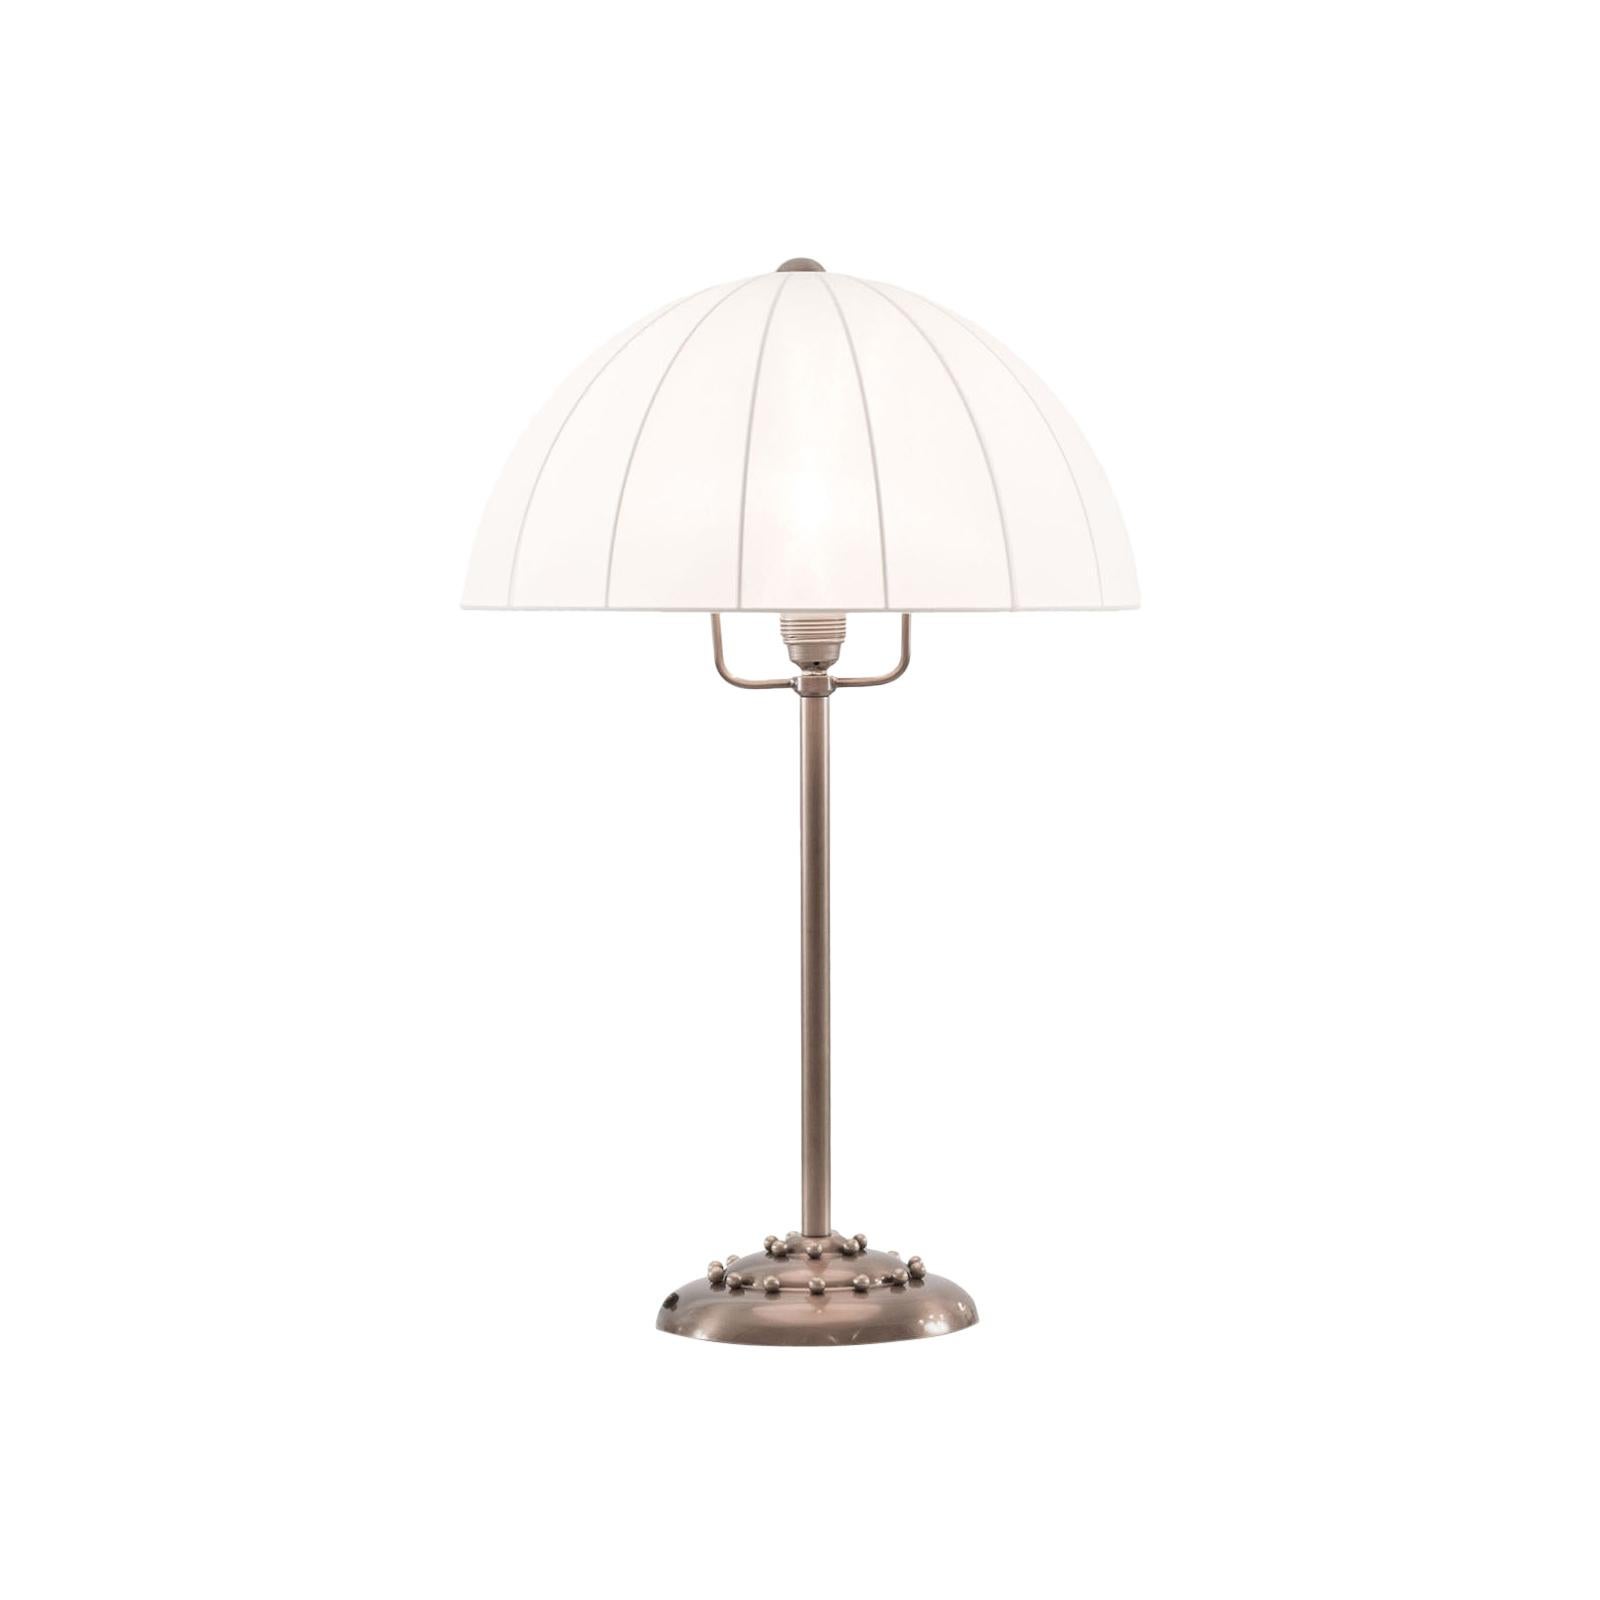 Desk lamp, originally manufactured at the historical Wiener Werkstätte and archived at the WW-pattern-books with the # S 142 - all in all, just eight lamps were manufactured at the WW. 

Most components according to the UL regulations, with an